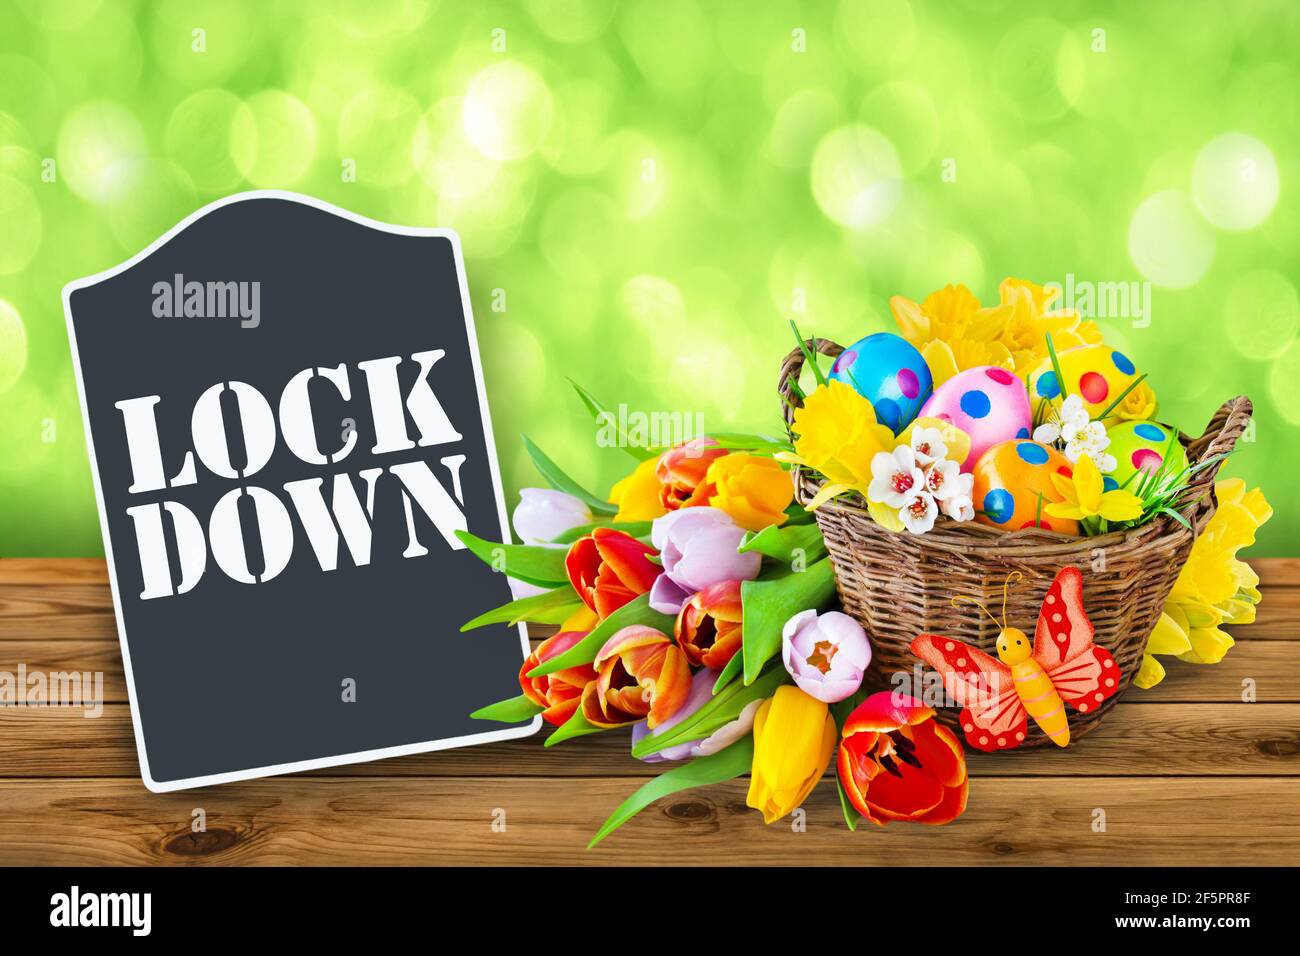 Lockdown and Easter decoration country style Stock Photo